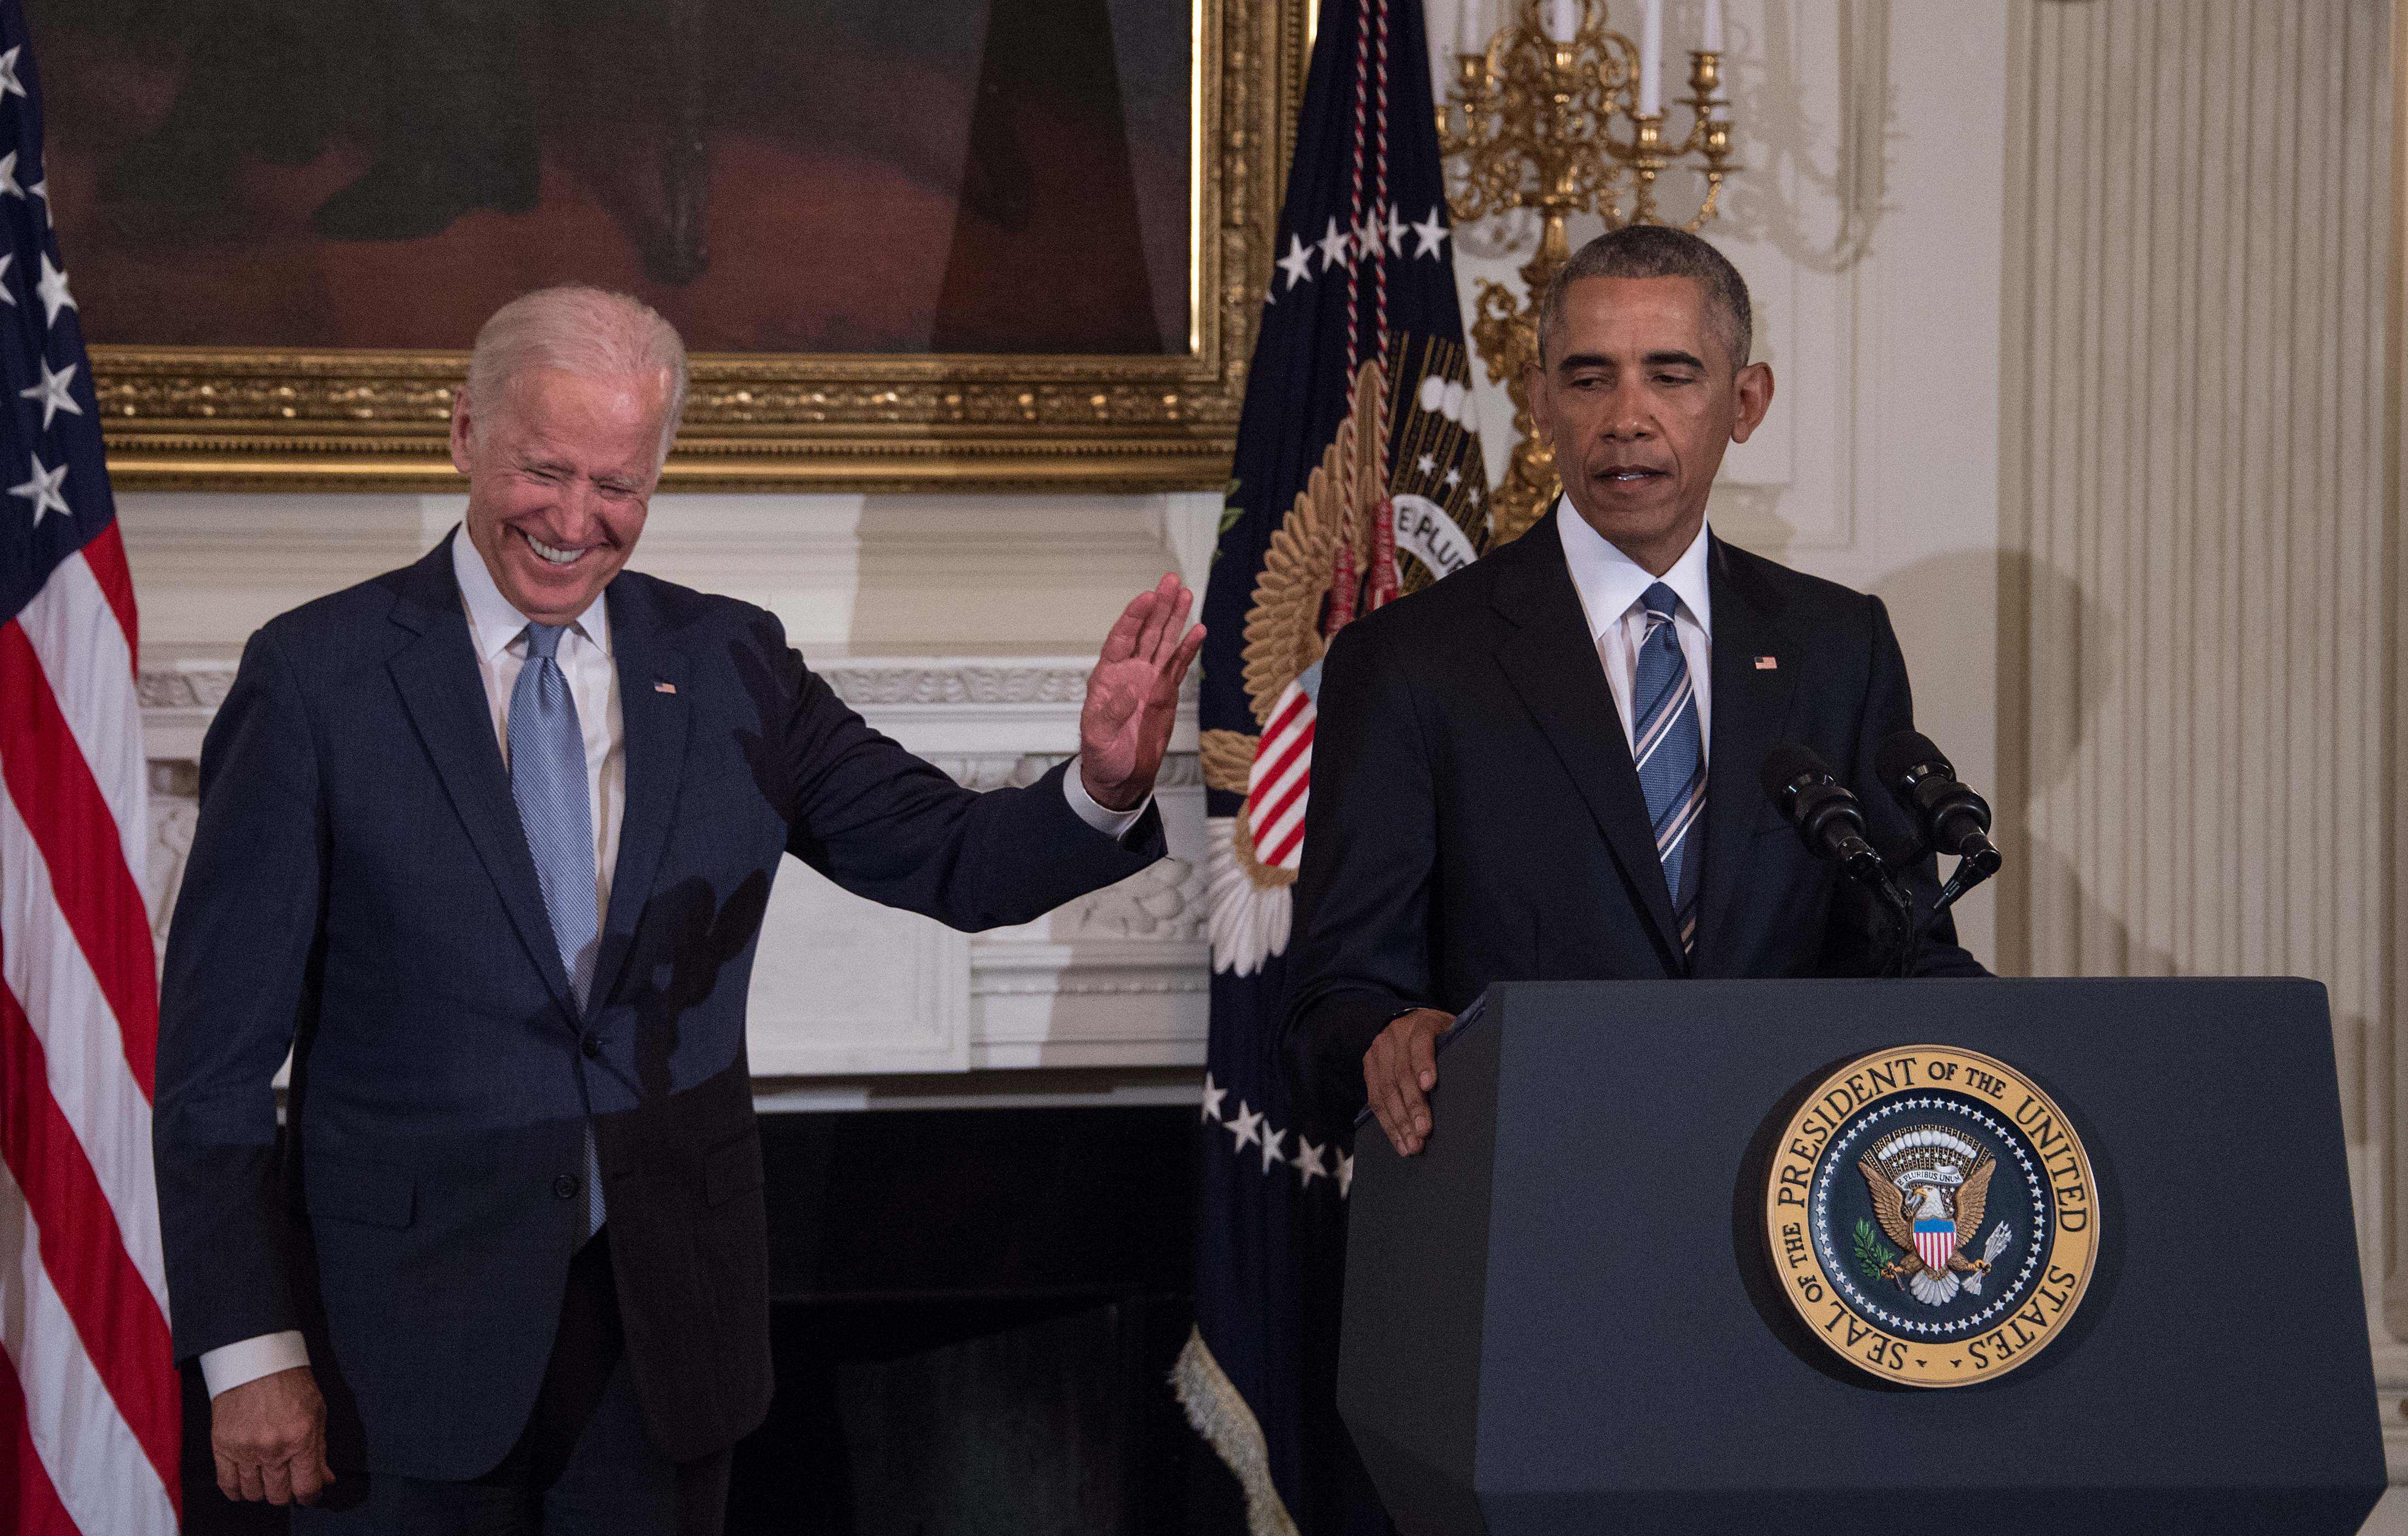 Obama surprises Vice President Biden with Medal of Freedom